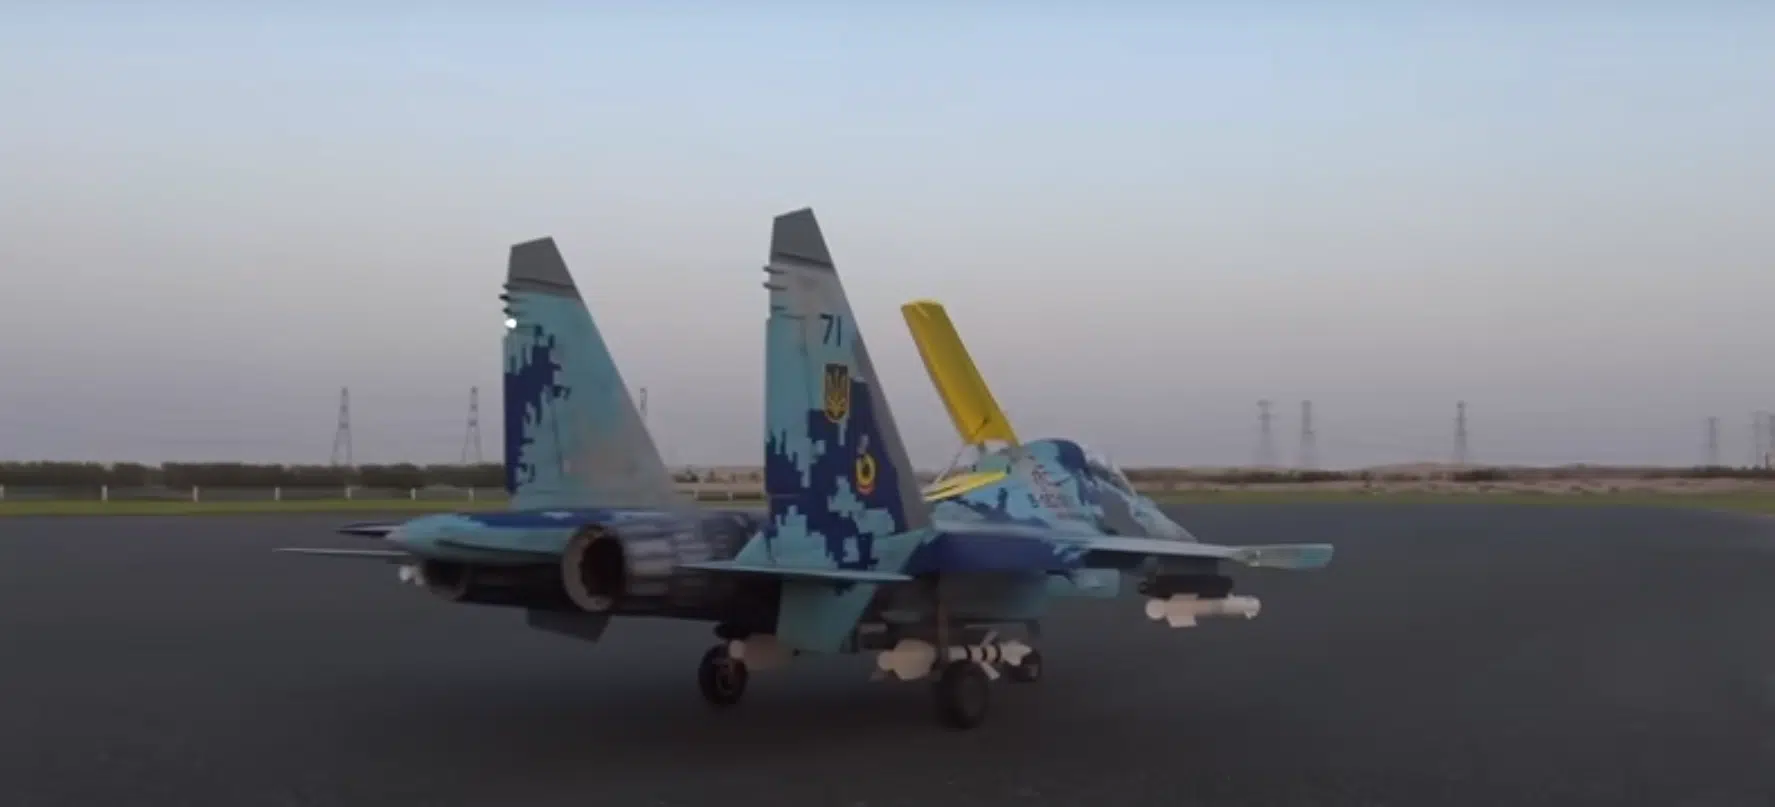 watch-these-miniature-replica-fighter-jets-fly-at-500-kilometers-per-hour